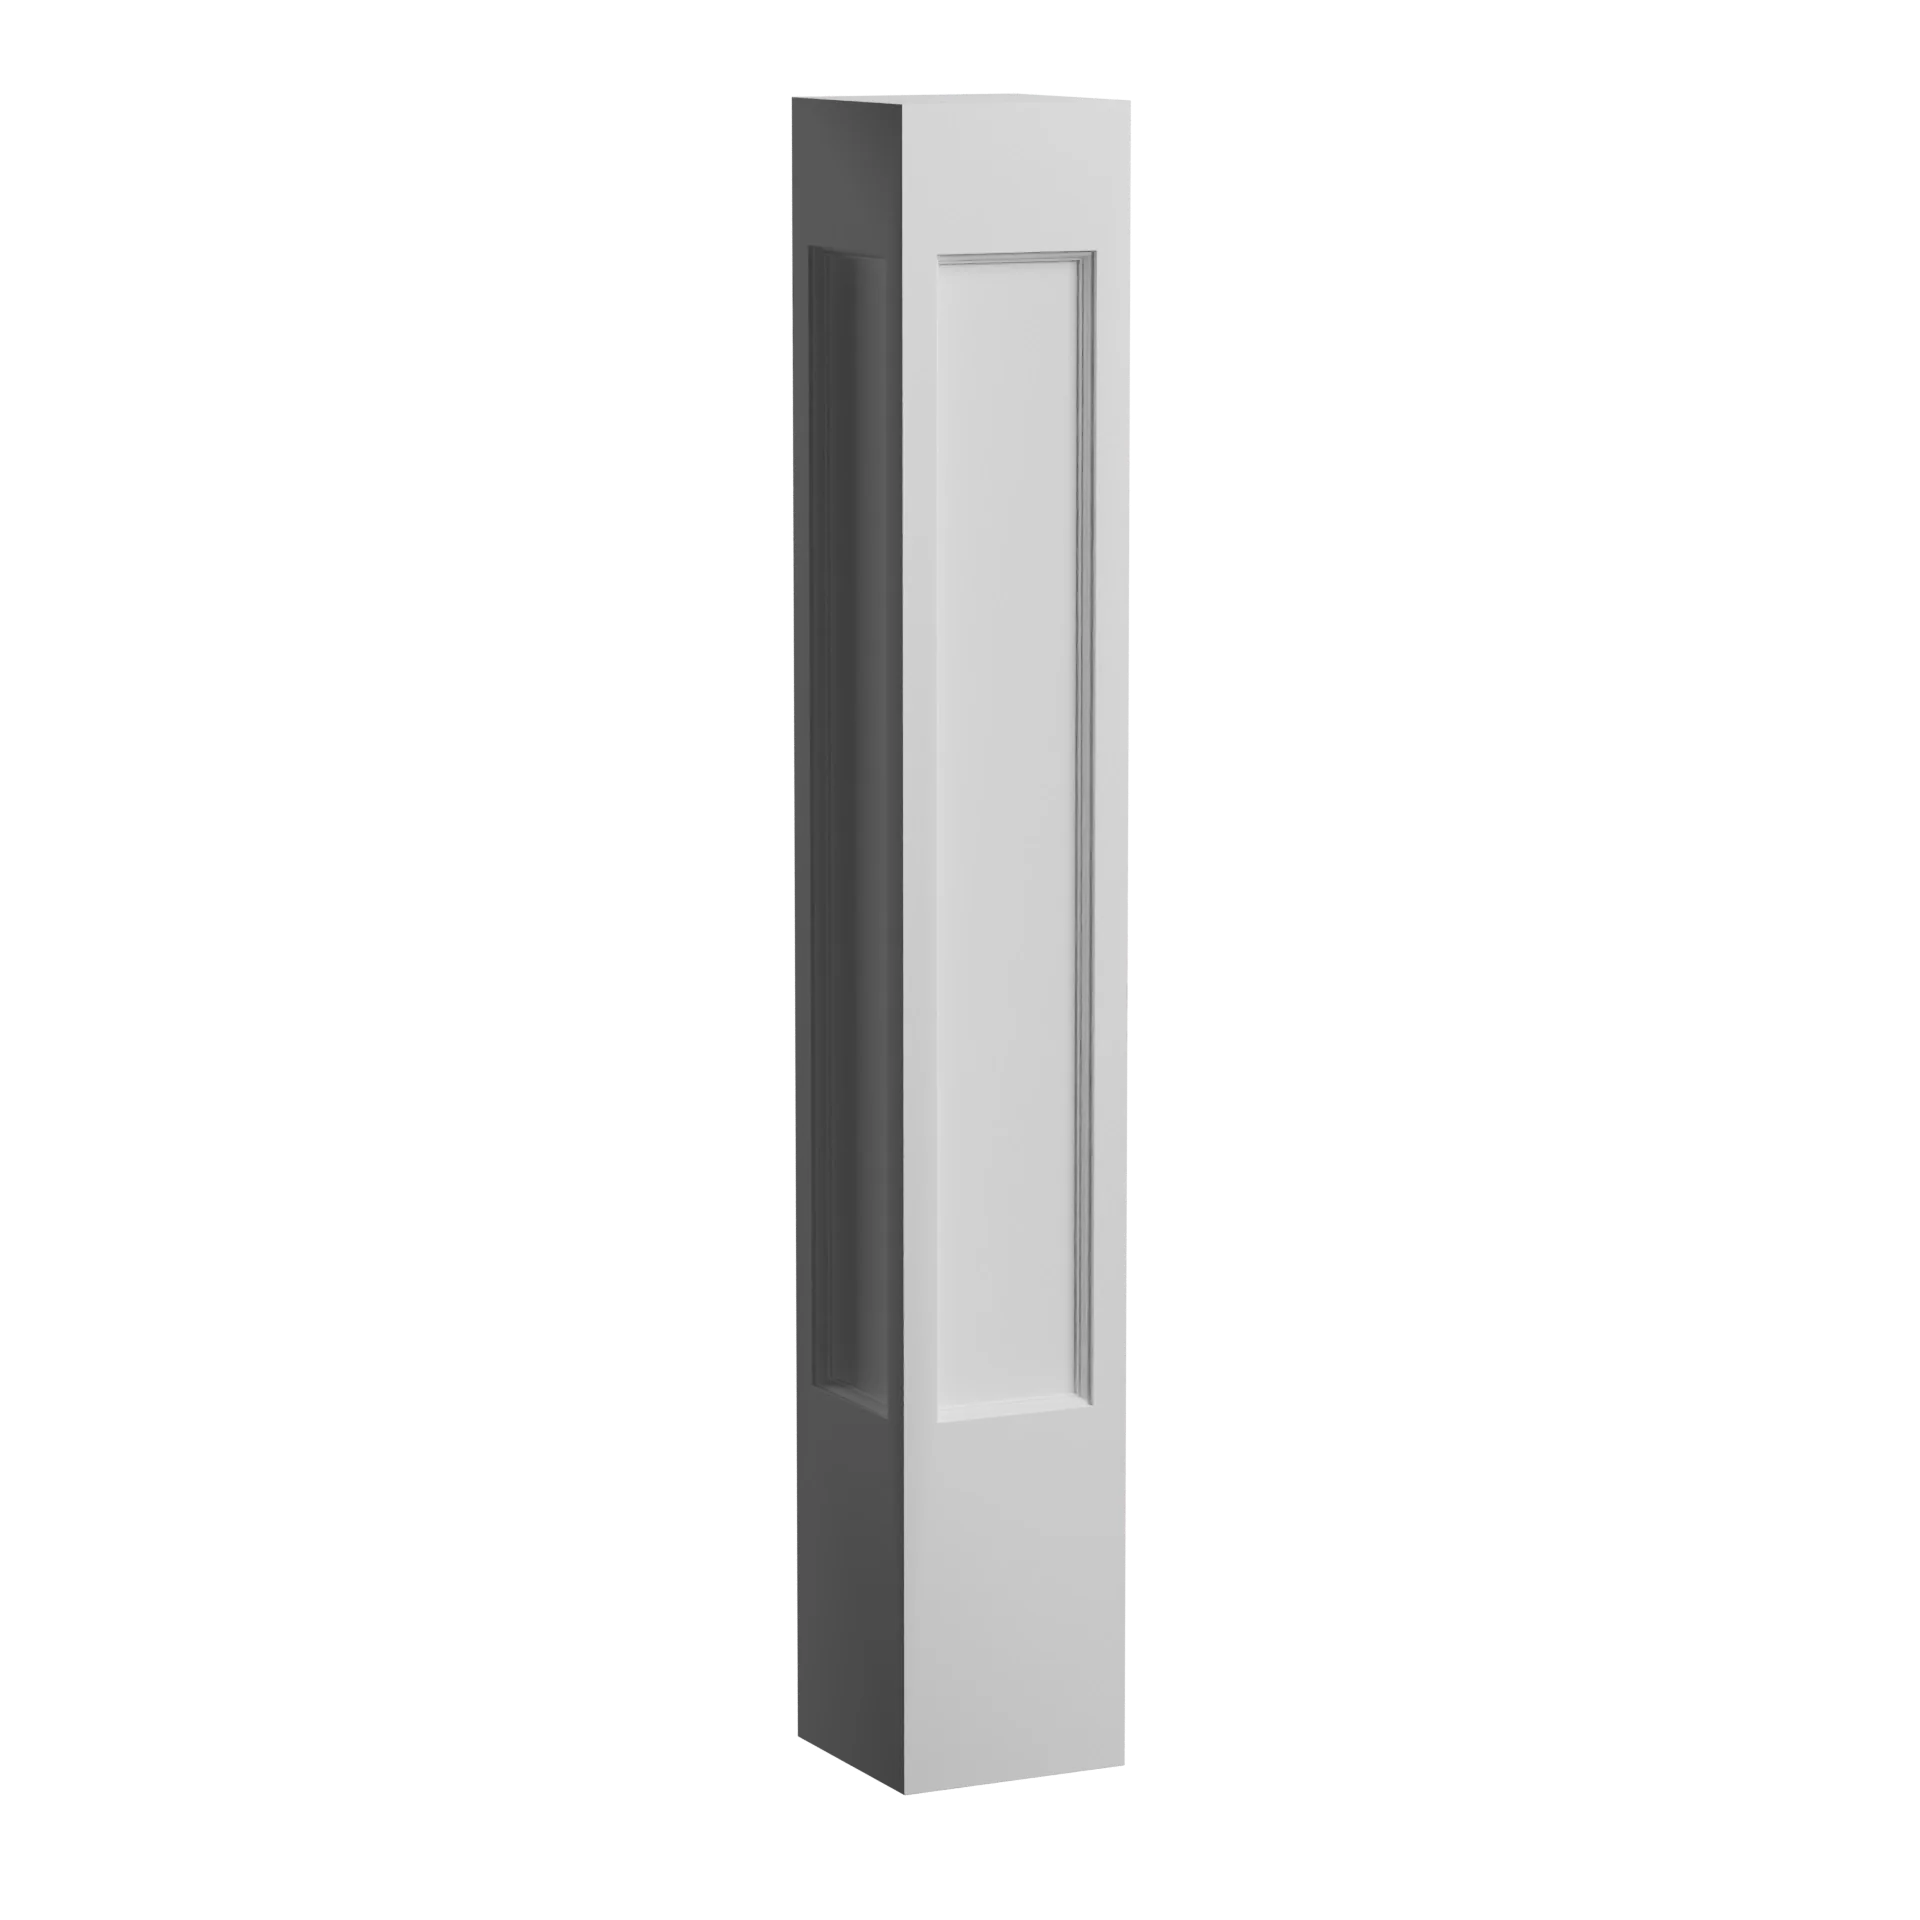 12 Inch W x 48 Inch H Recessed Flat Panel Newel Post Inline